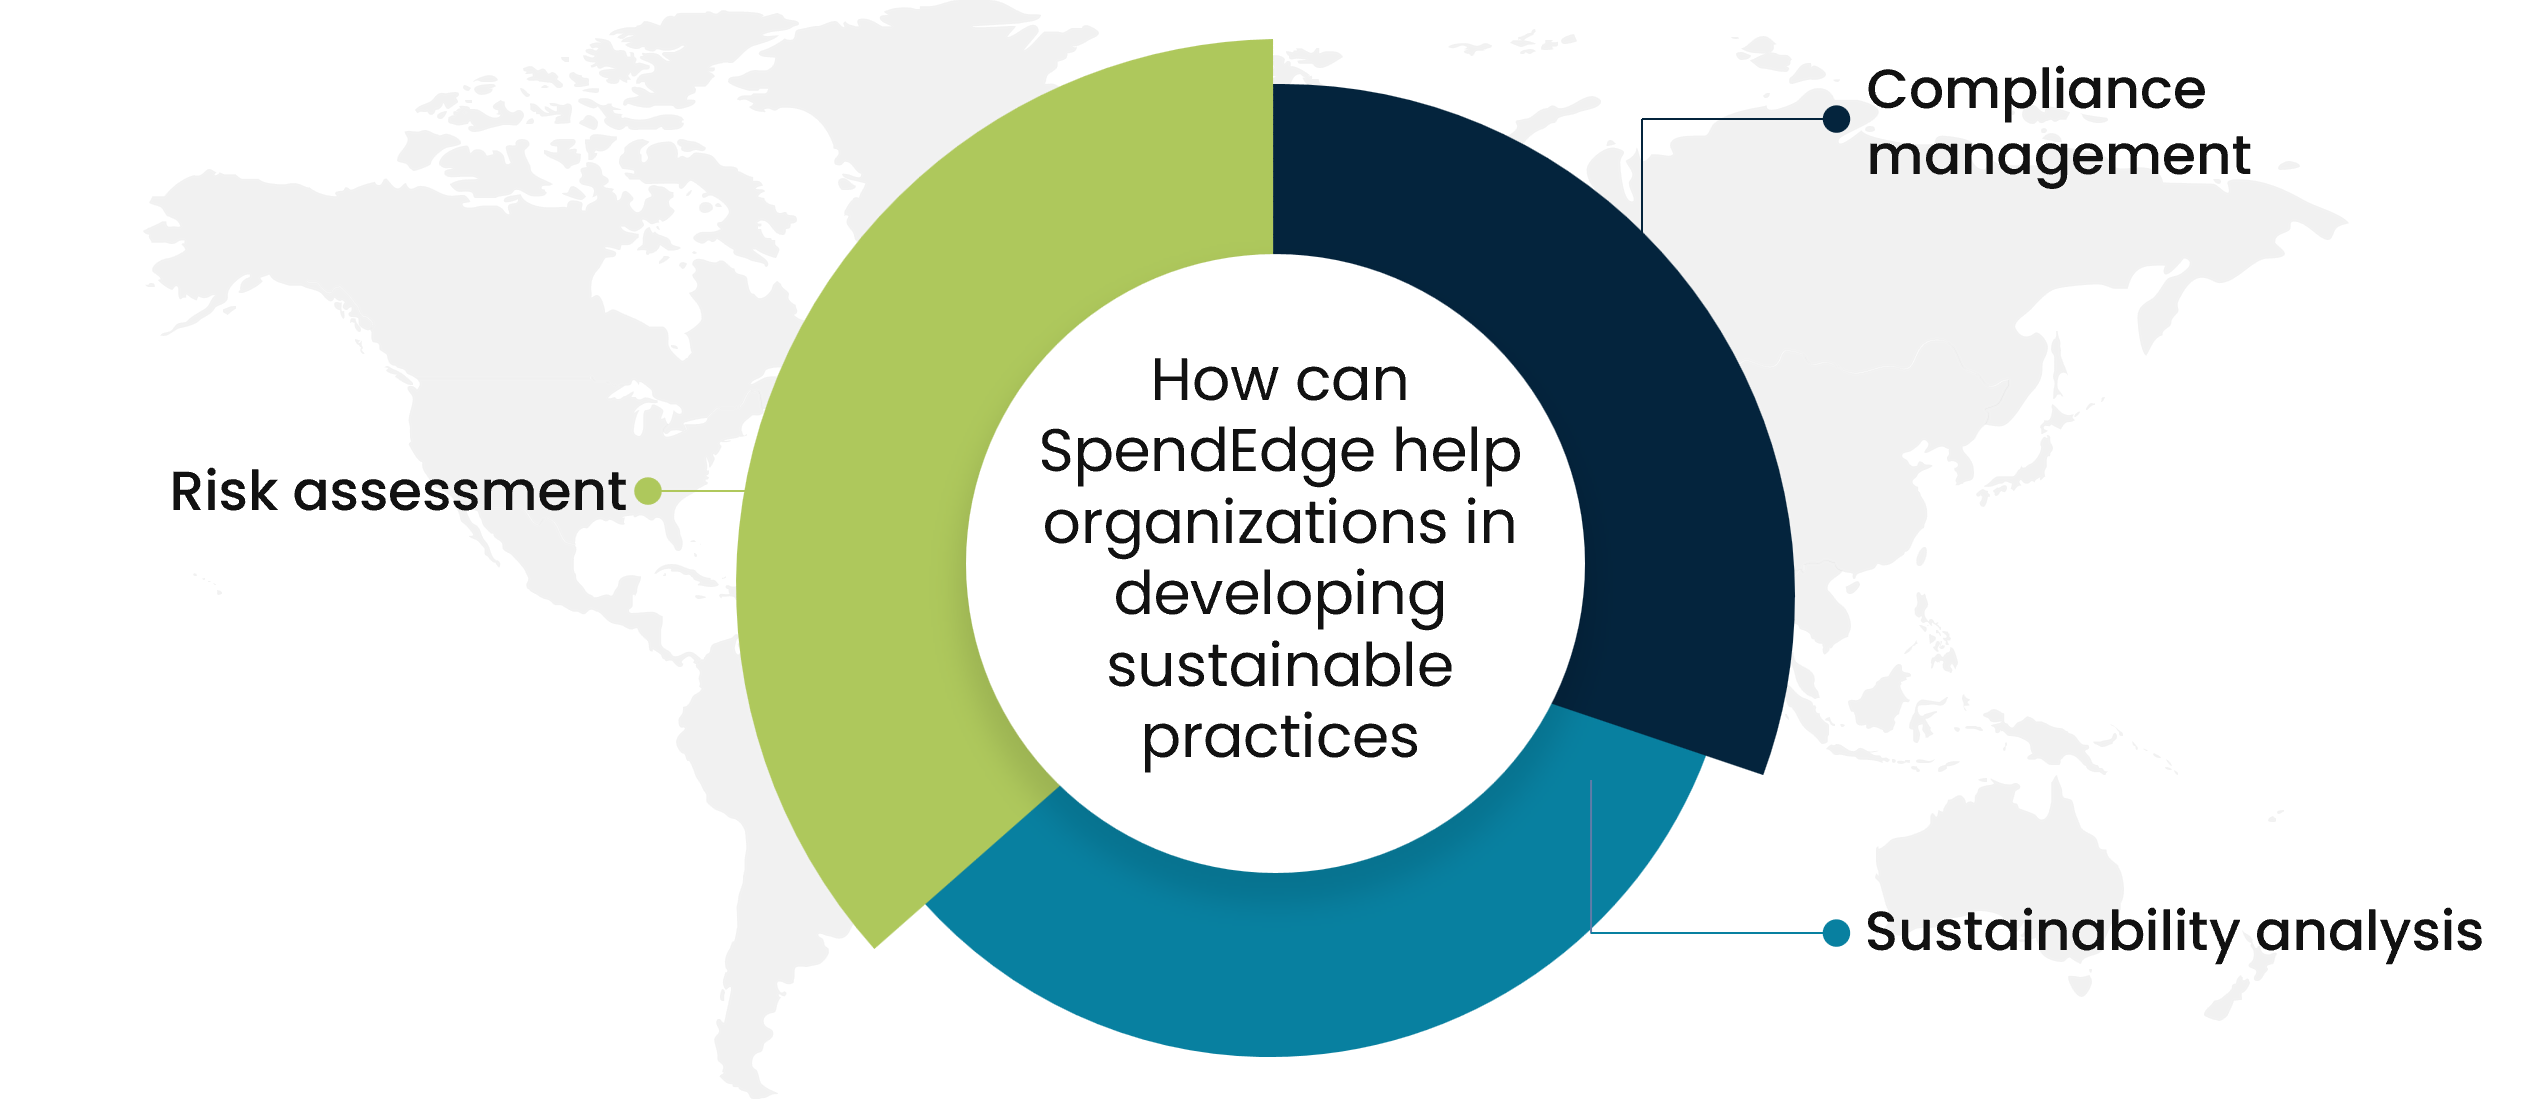 How can SpendEdge help organizations in developing sustainable practices and 